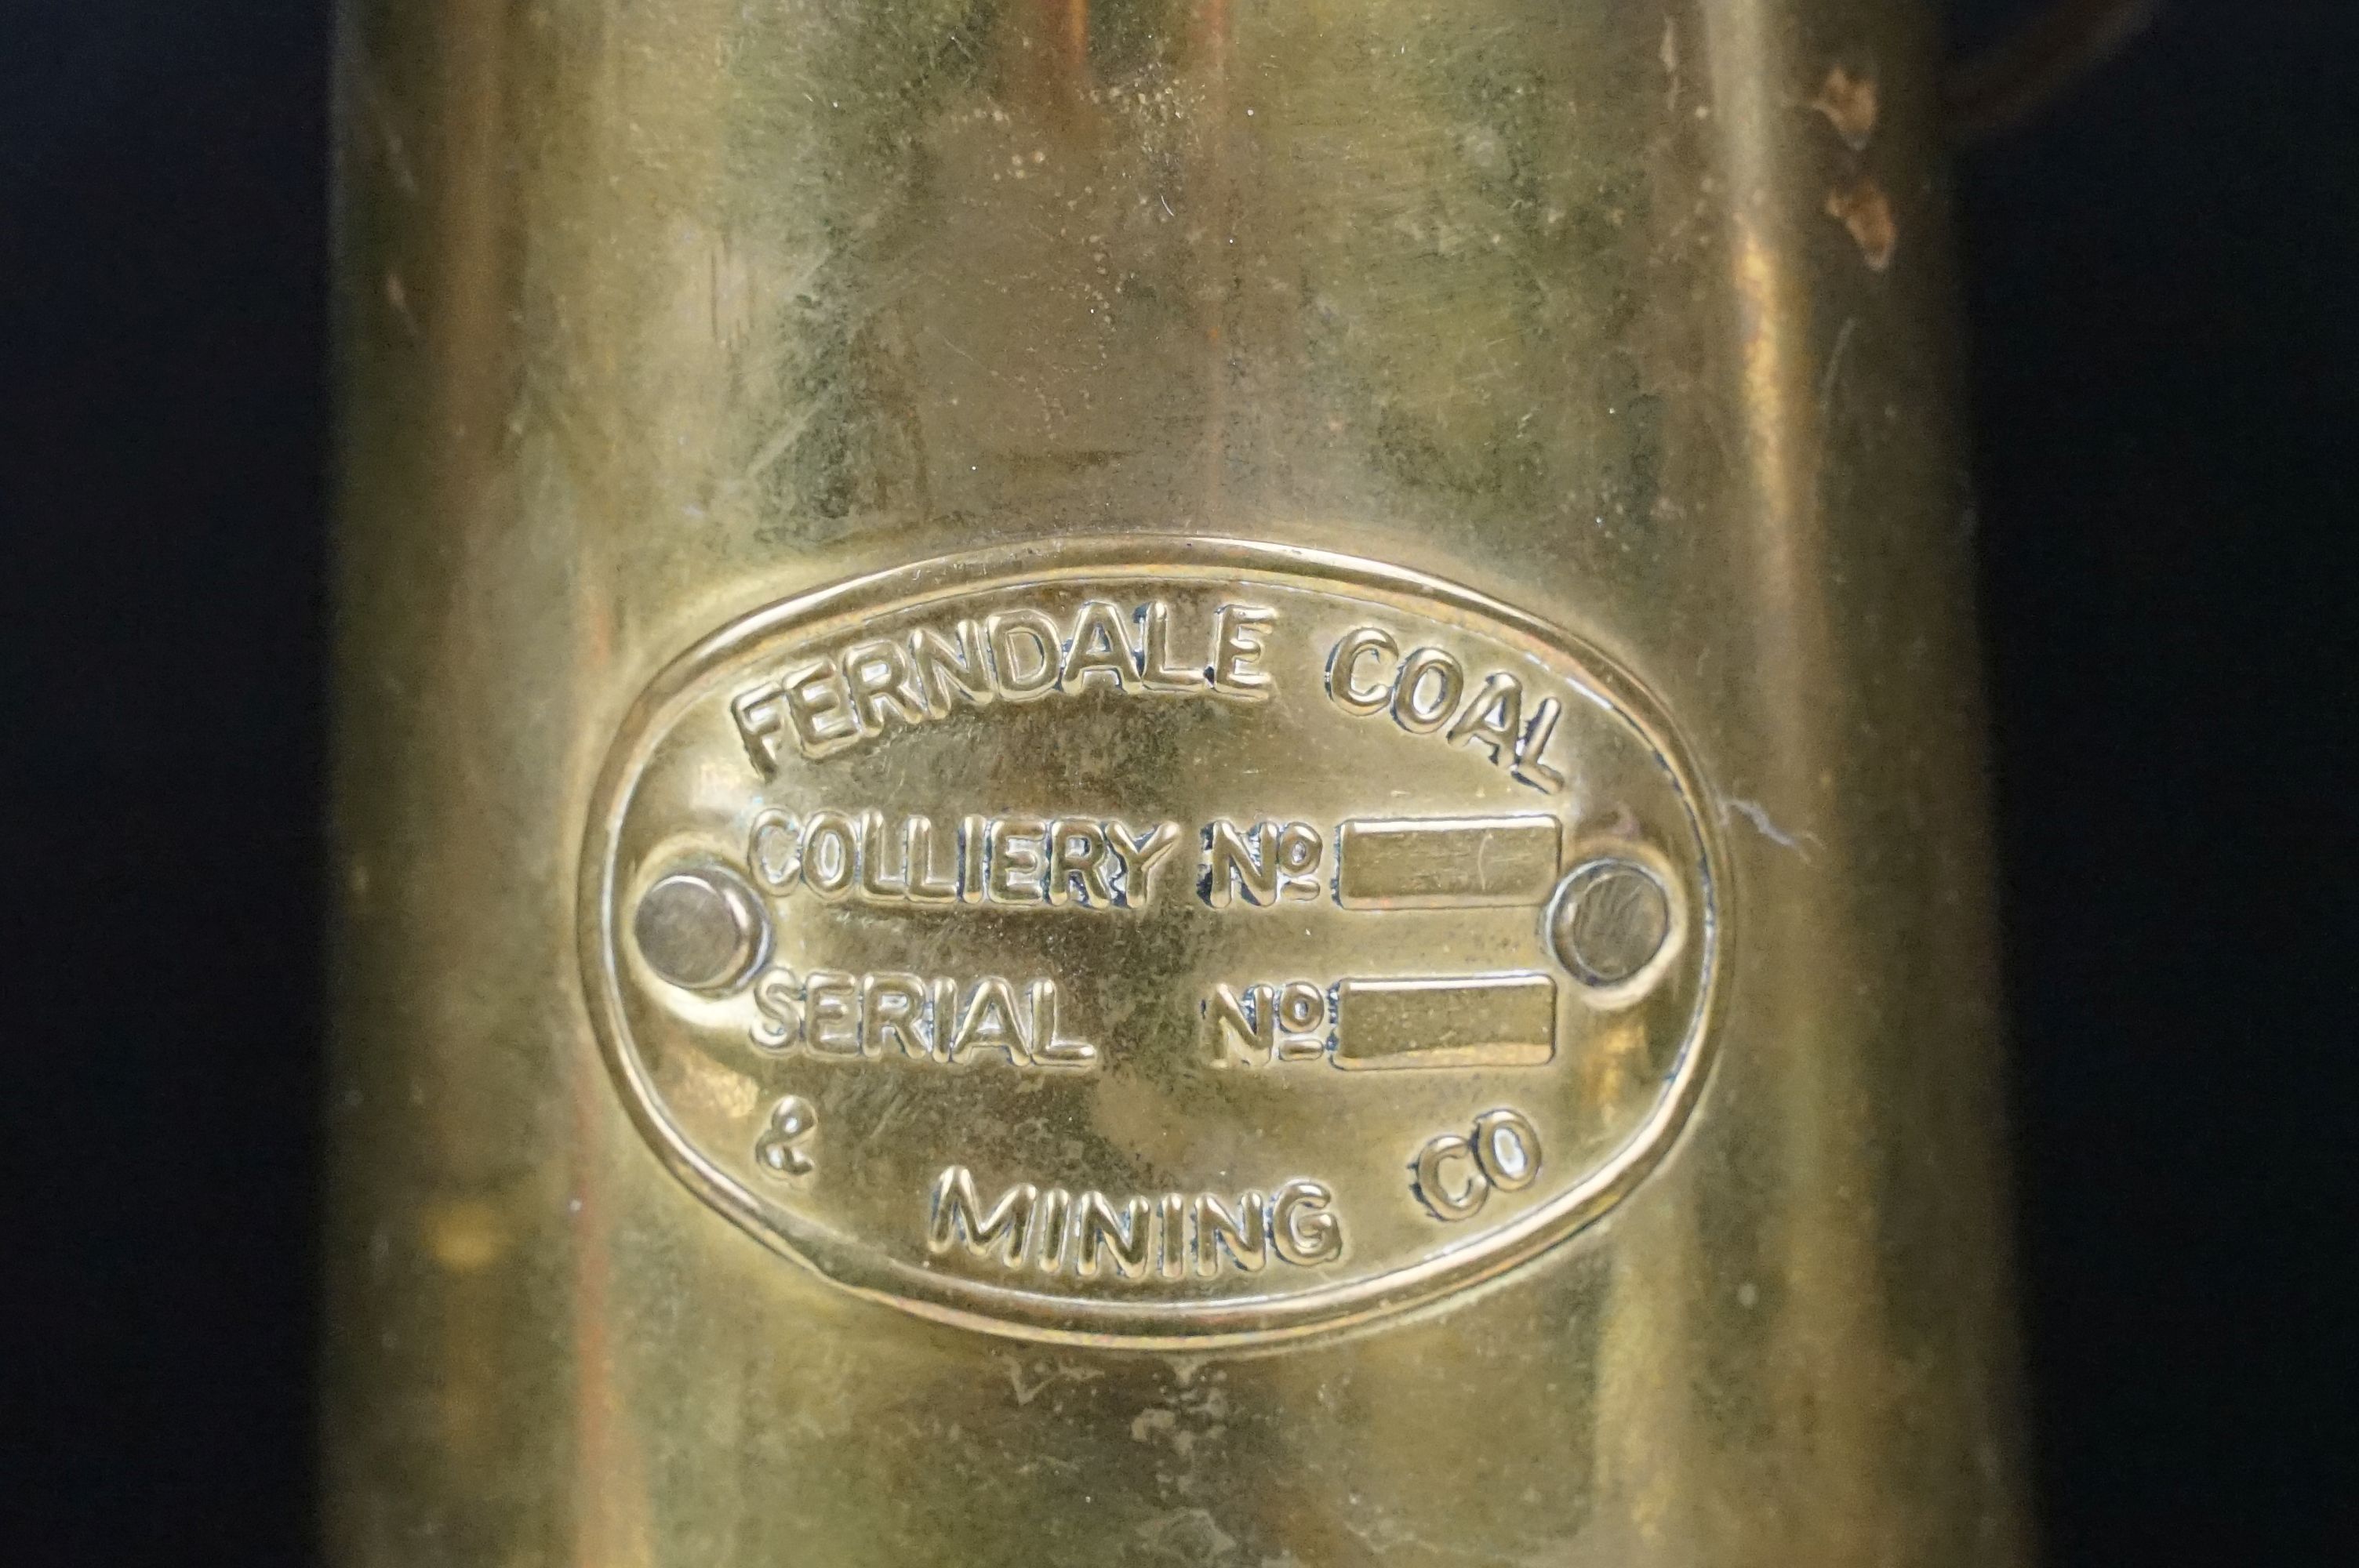 Group of six miners lamps to include E. Thomas & Williams Ltd, Ferndale Coal & Mining Co., The - Image 4 of 6